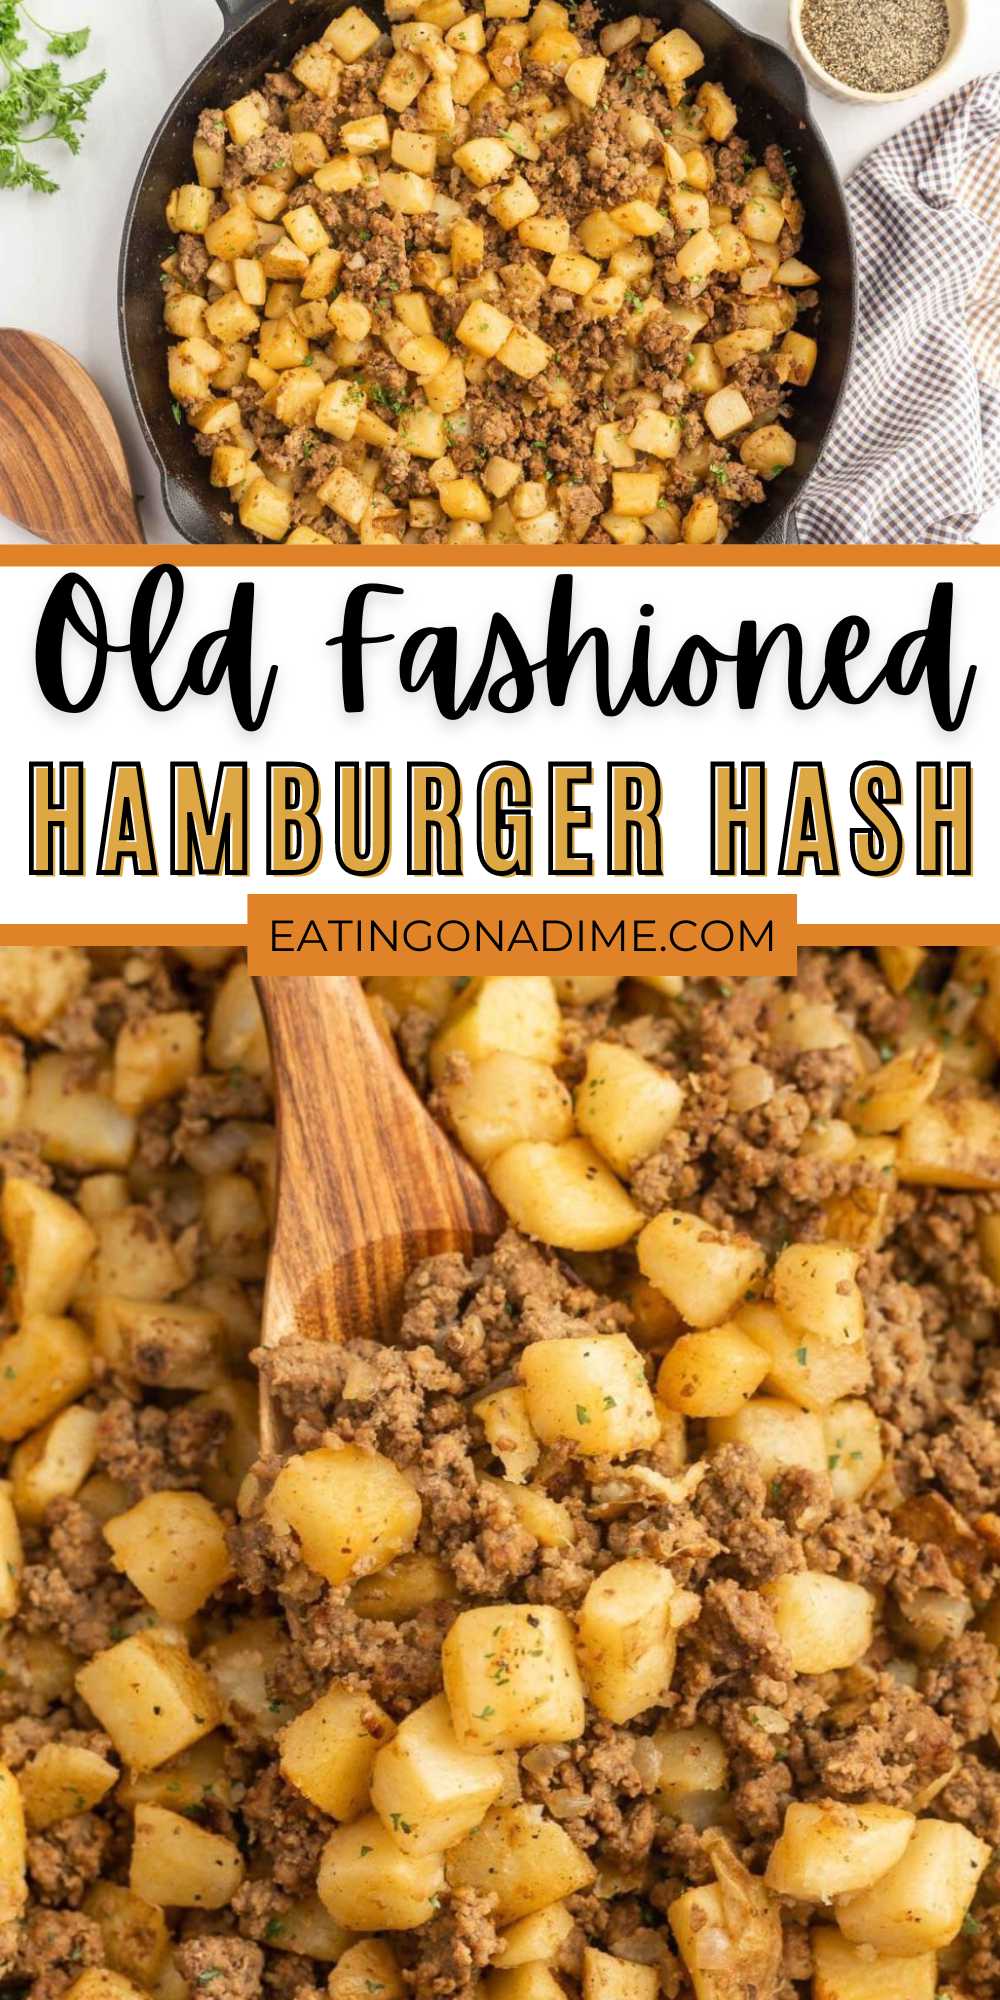 You are going to love this Hamburger Hash recipe. It is loaded with potatoes, beef, and simple seasoning. Easy, flavorful weeknight meal. This old fashioned meal cooks easily in the skillet in less than 20 minutes. Add your favorite roasted vegetables or salad and you have a complete meal. #eatingonadime #hamburgerhash #oldfashionedhamburgerhash